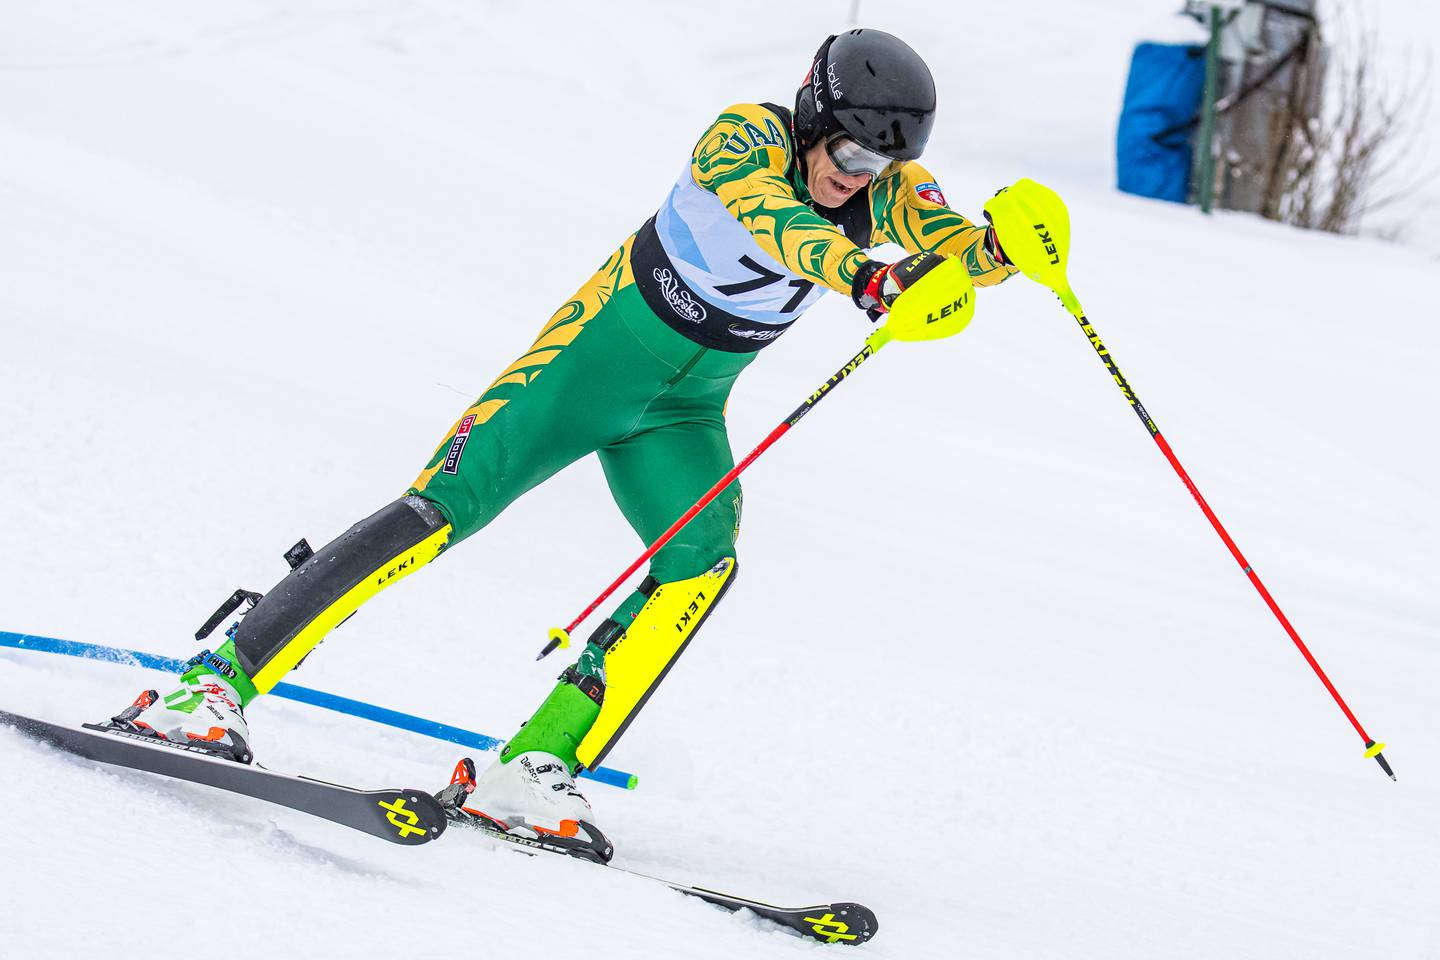 UAA's Leon Nikic poles to the finish during his second run in the FIS Slalom at the NCAA West Regional Championships